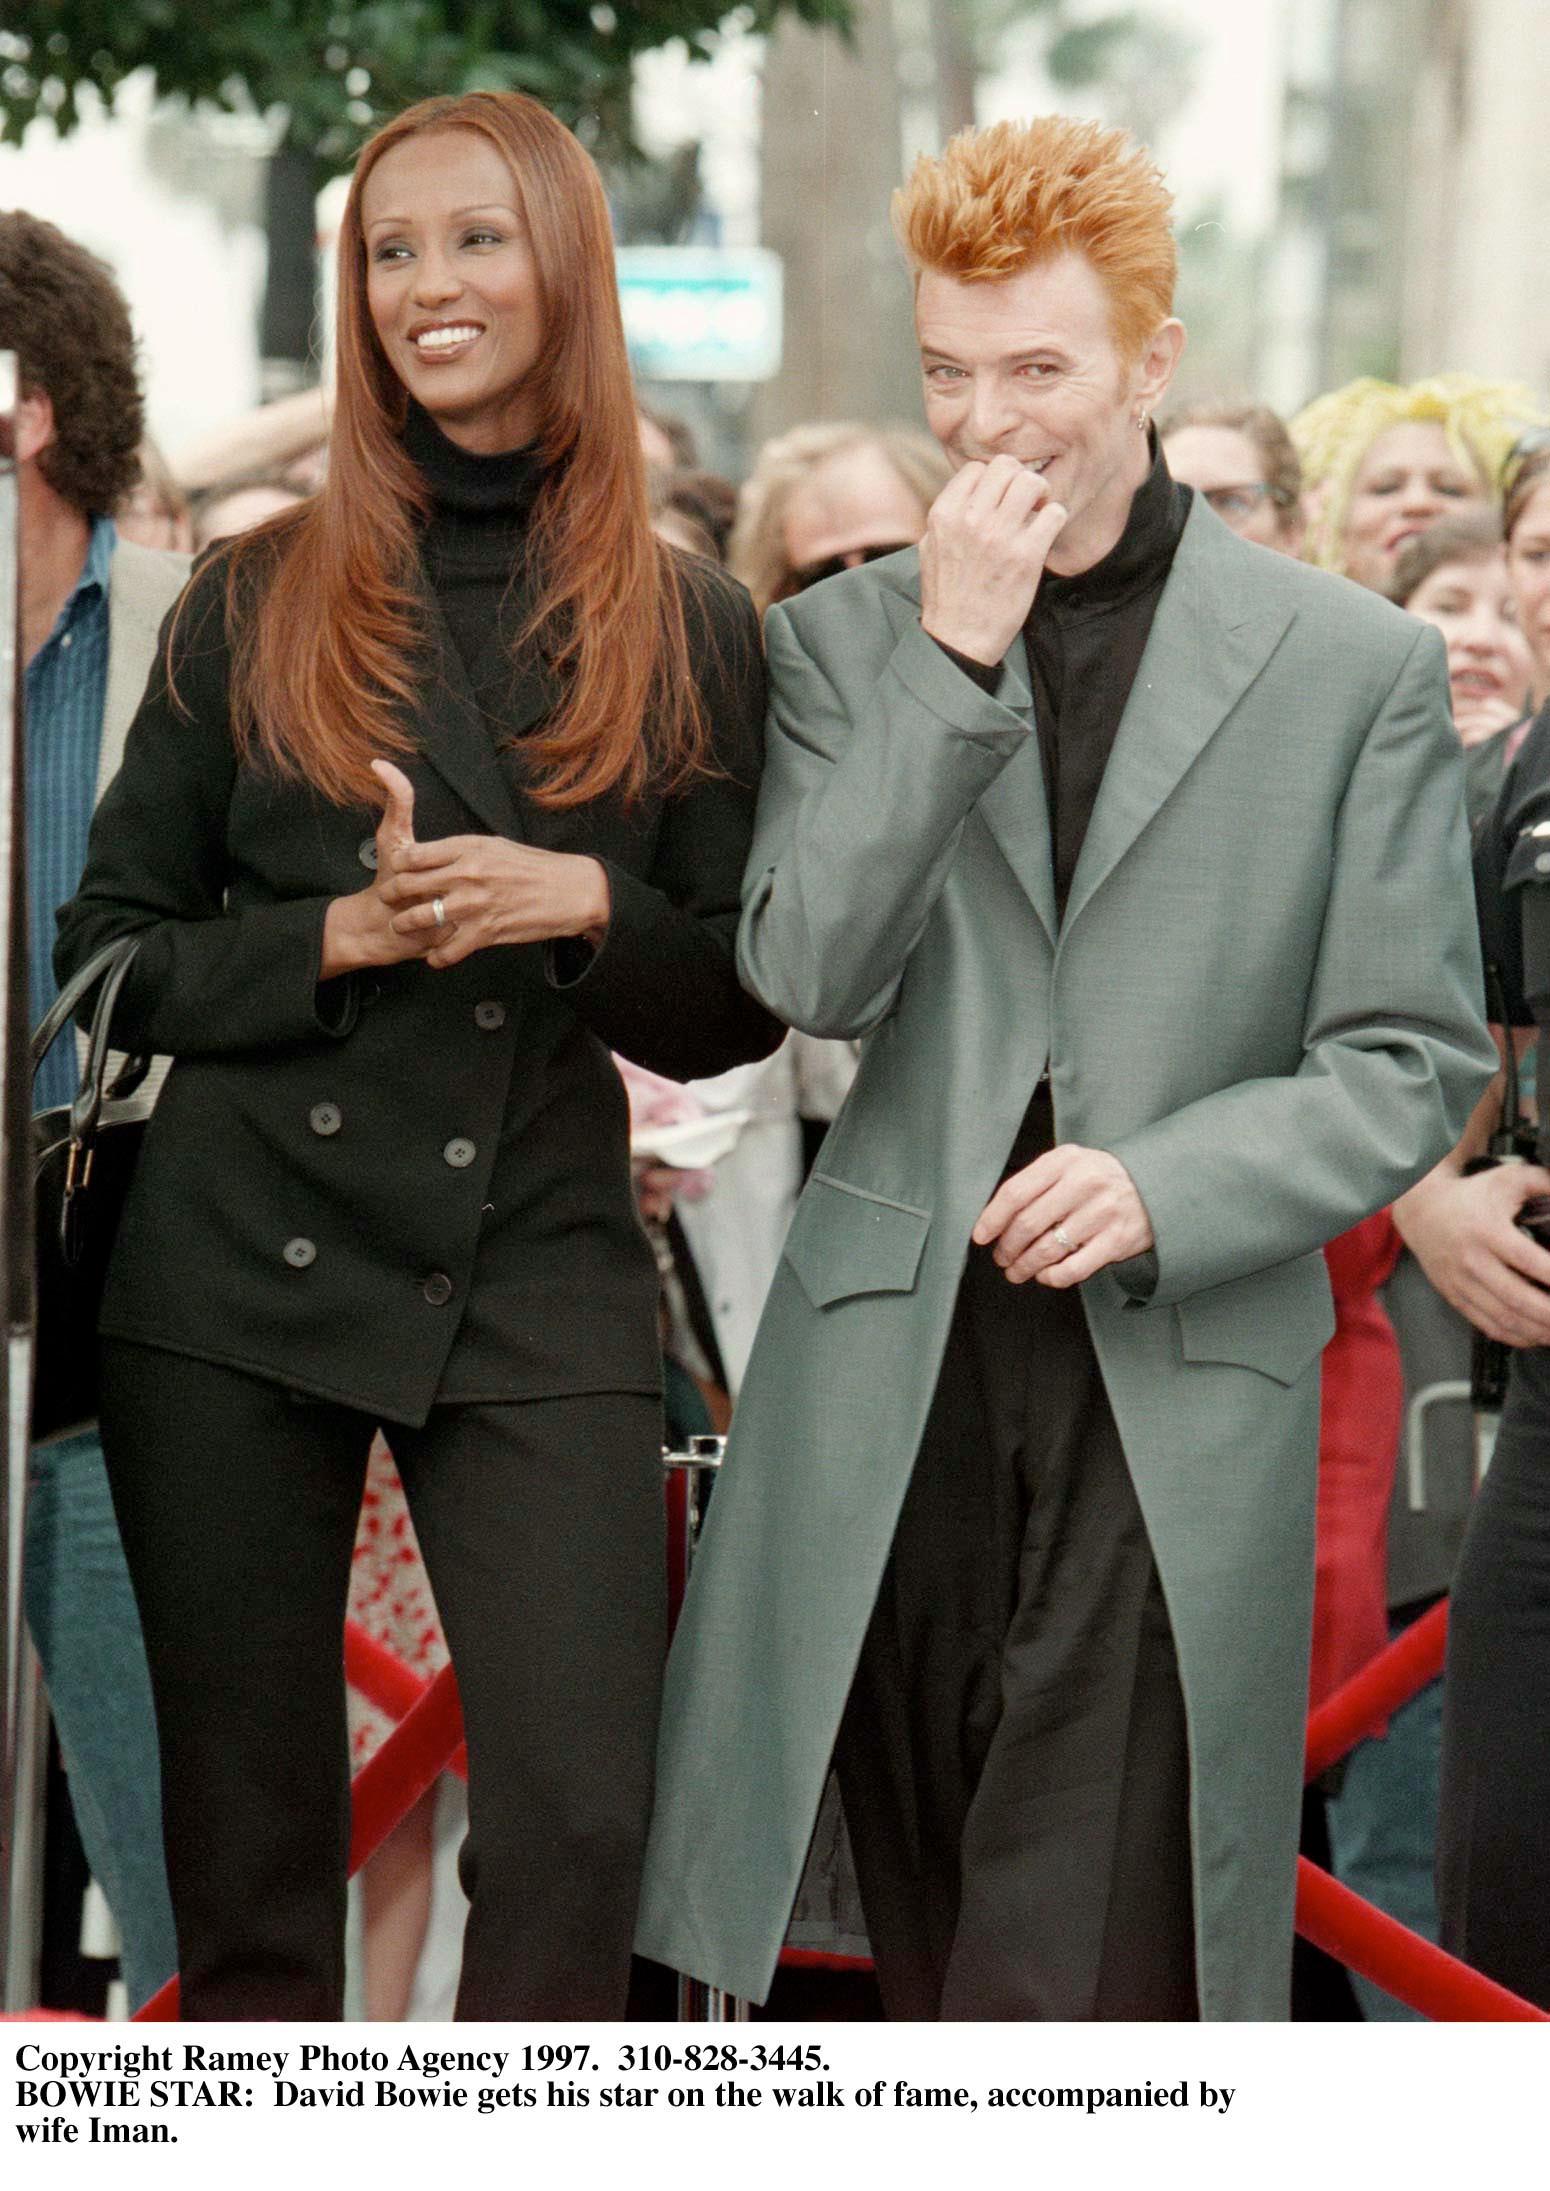 Iman and David Bowie smiling.